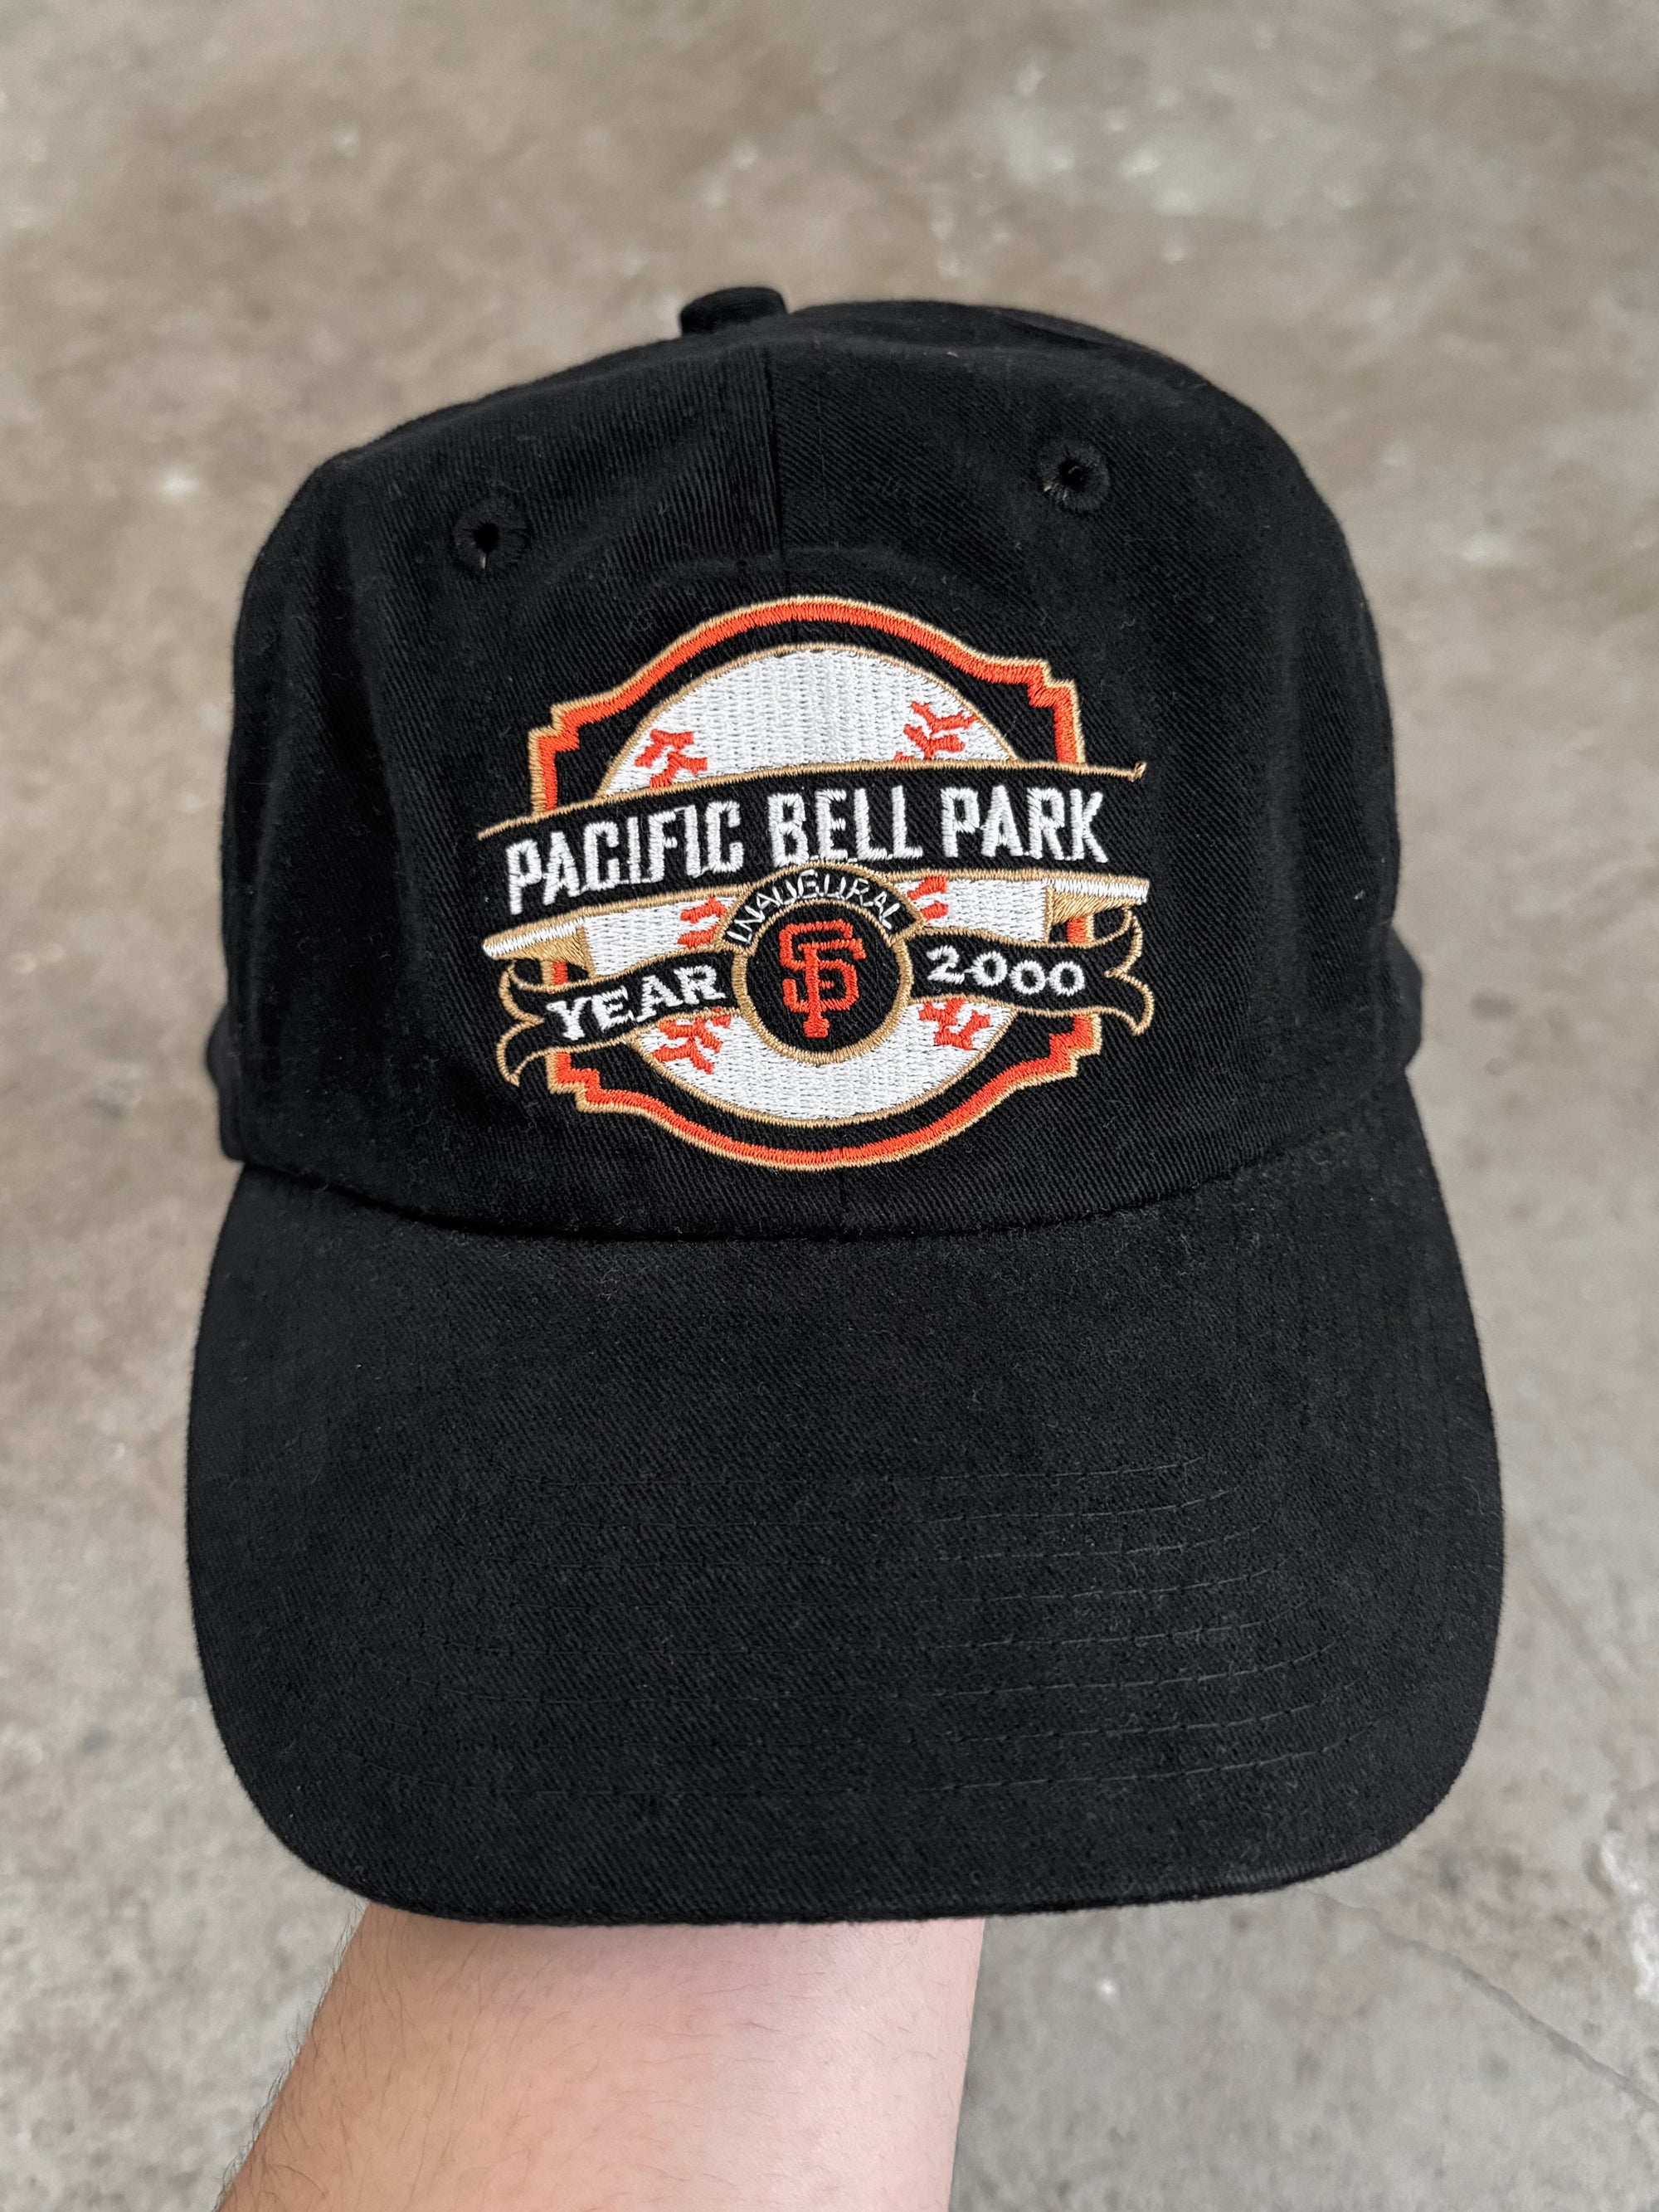 2000 "Pacific Bell Park Inaugural" Hat